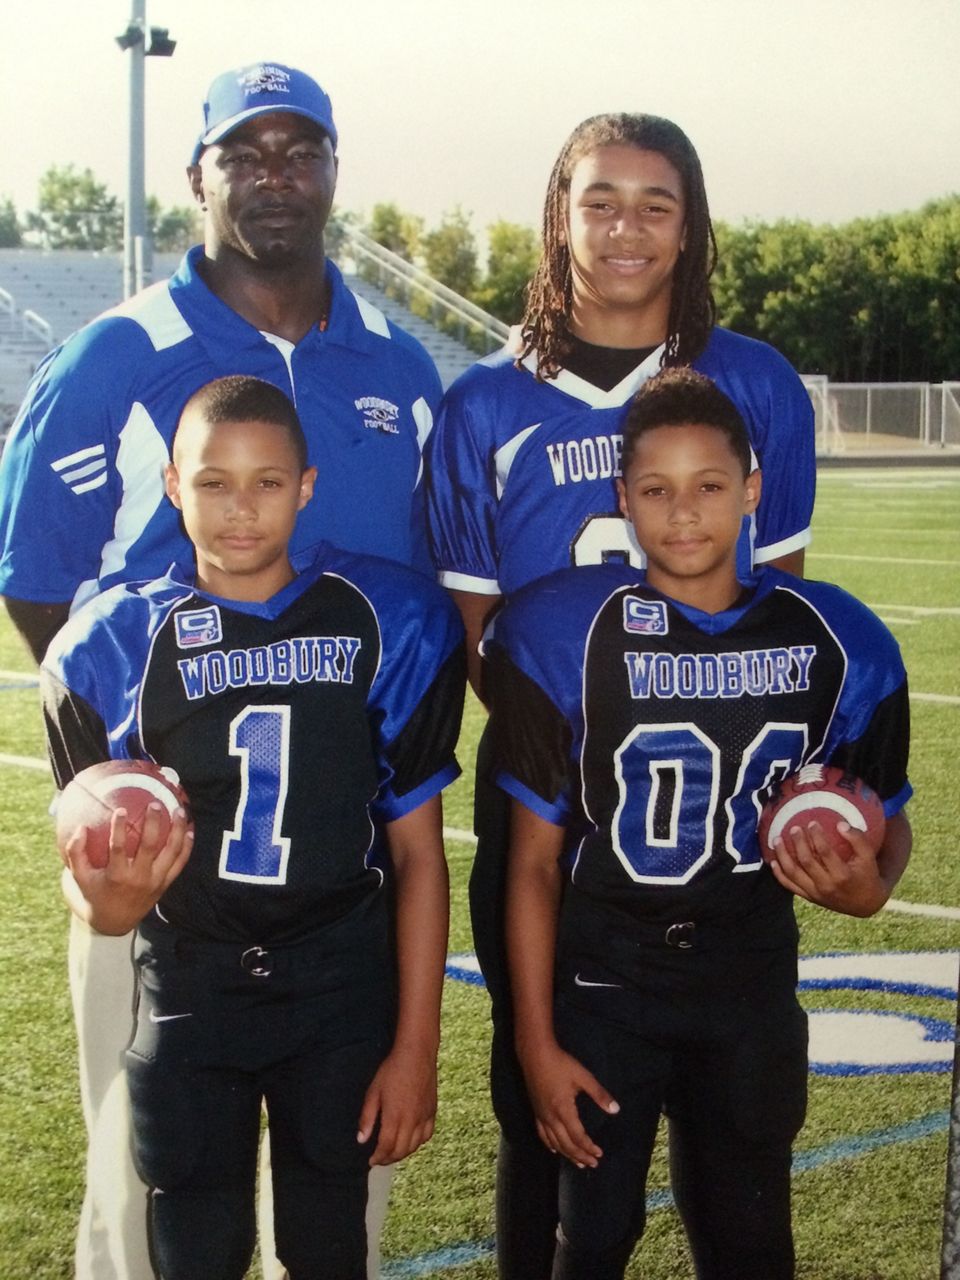 The Green family pose for a football photo when the twins were in grade school. (Courtesy: The Green family)